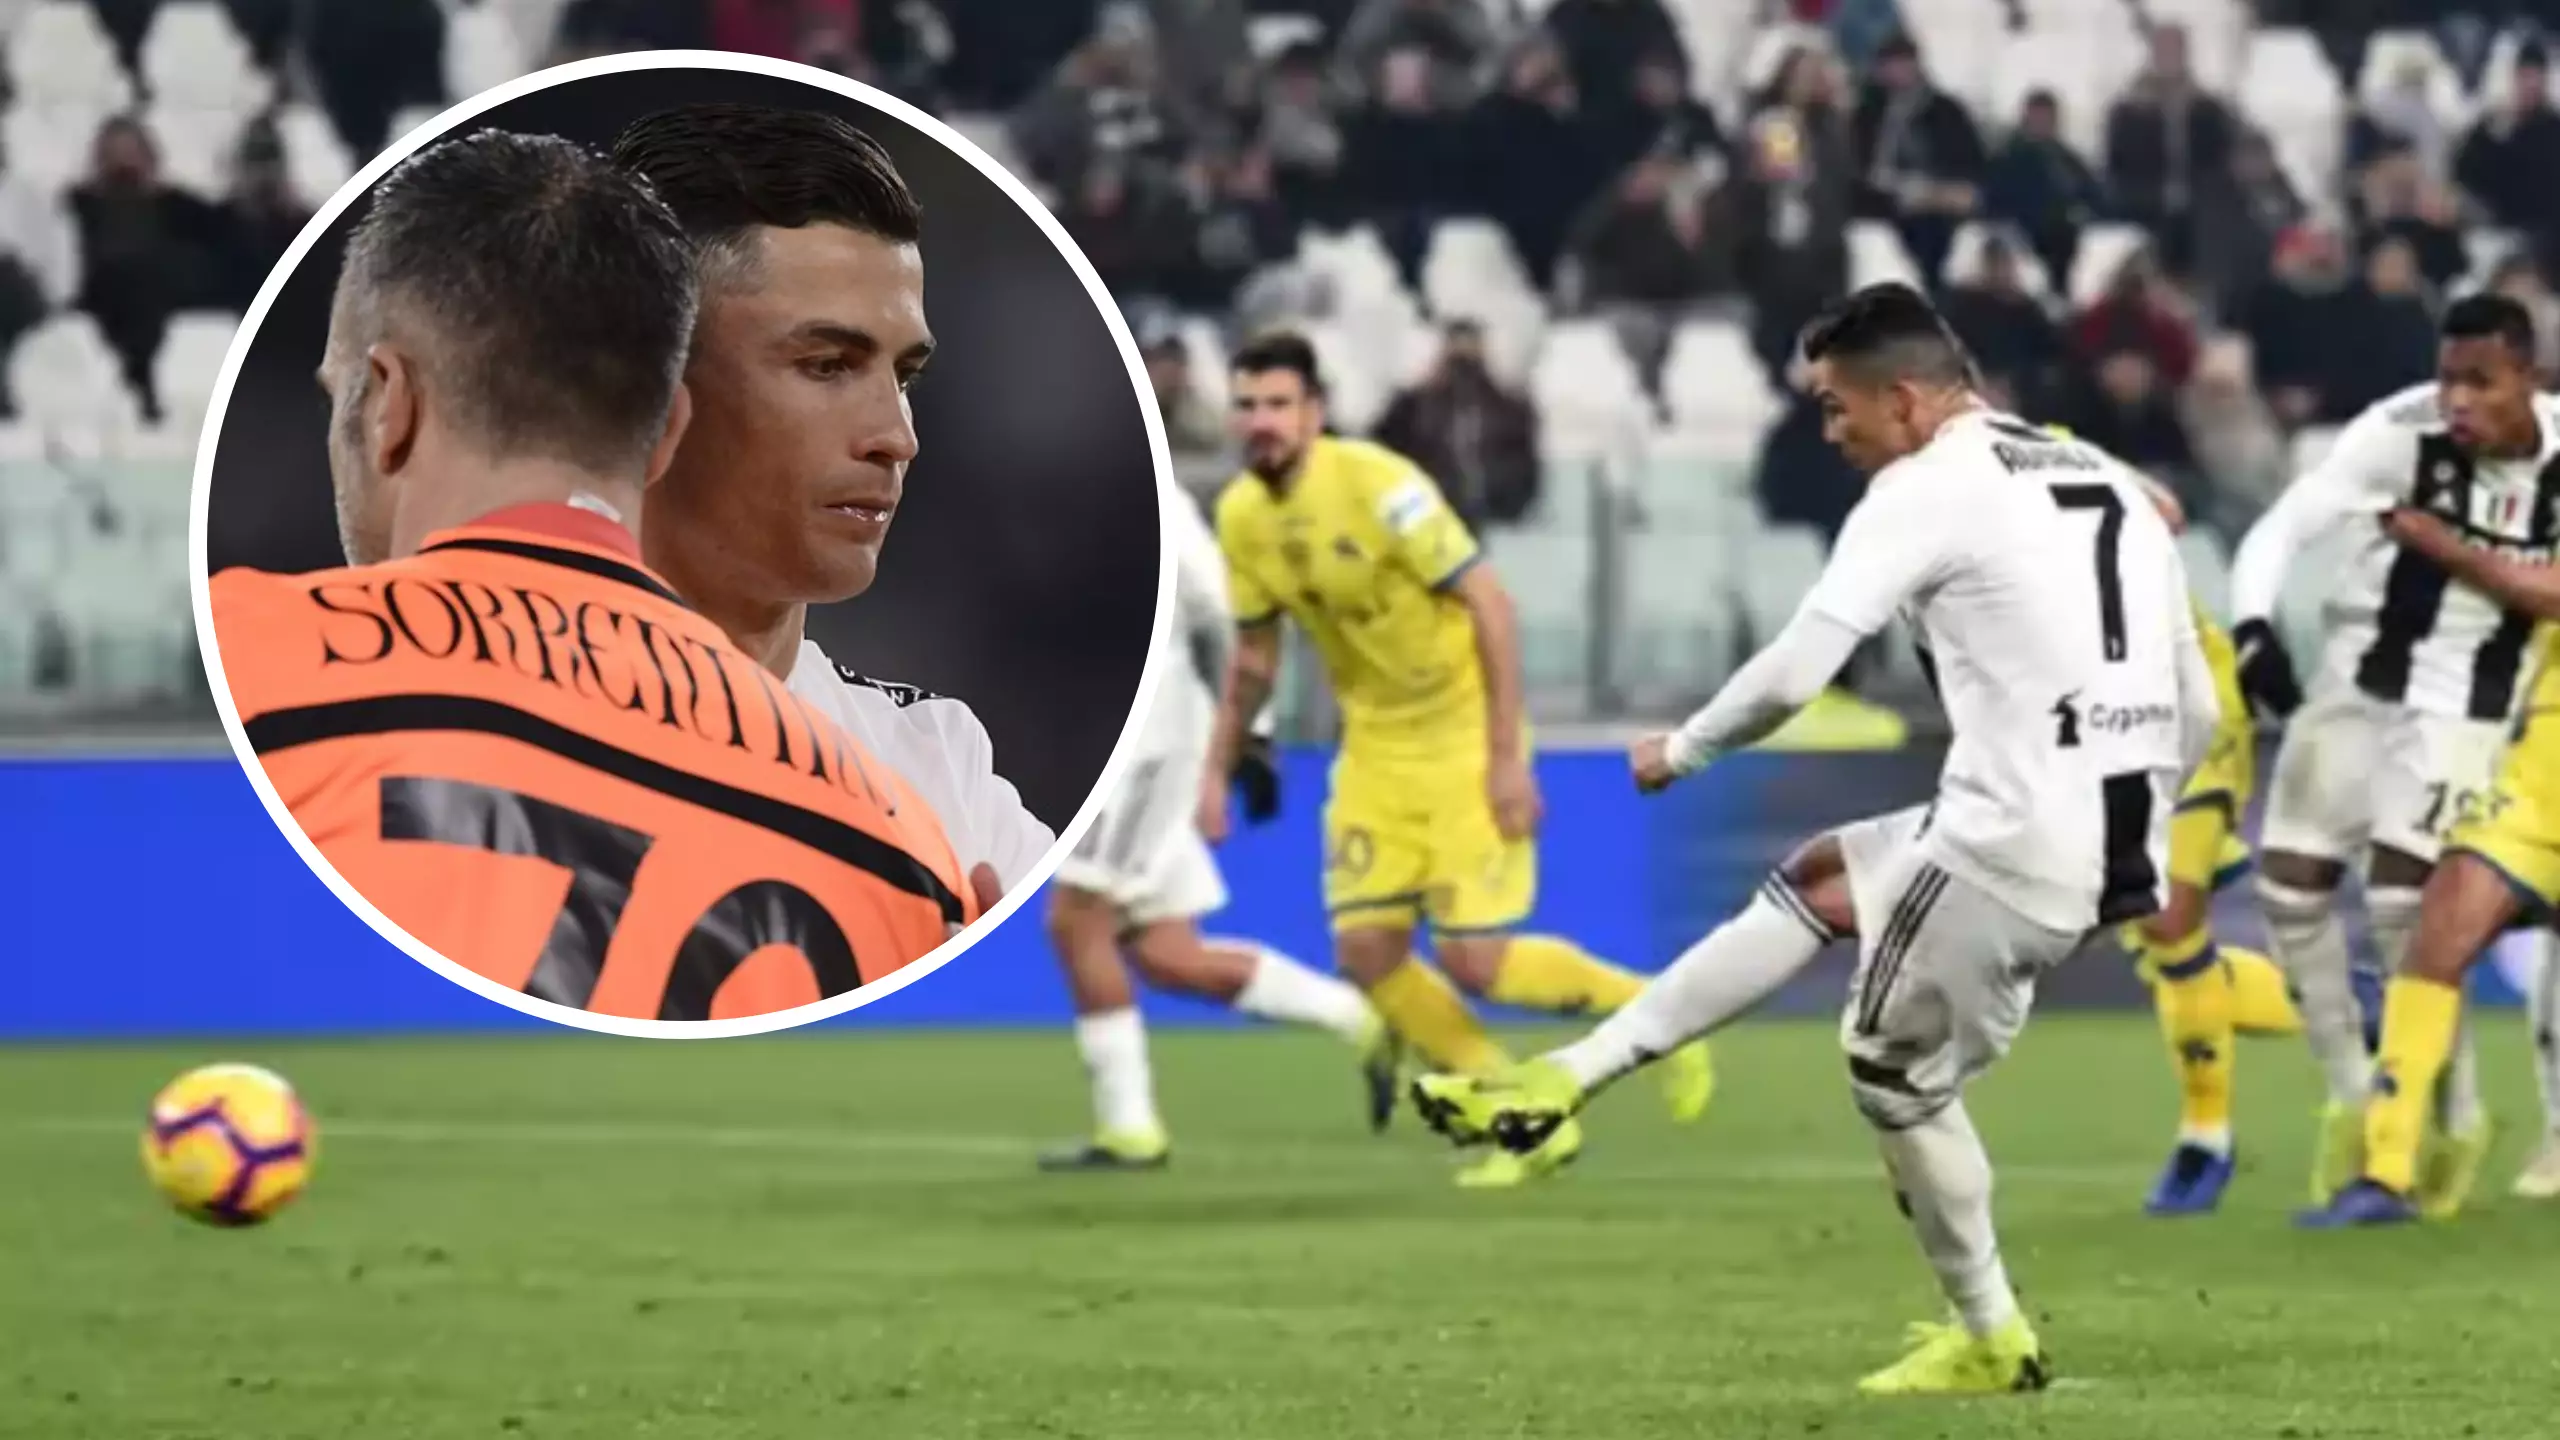 Cristiano Ronaldo 'Refused To Swap Shirts' With Goalkeeper Who Saved His Penalty